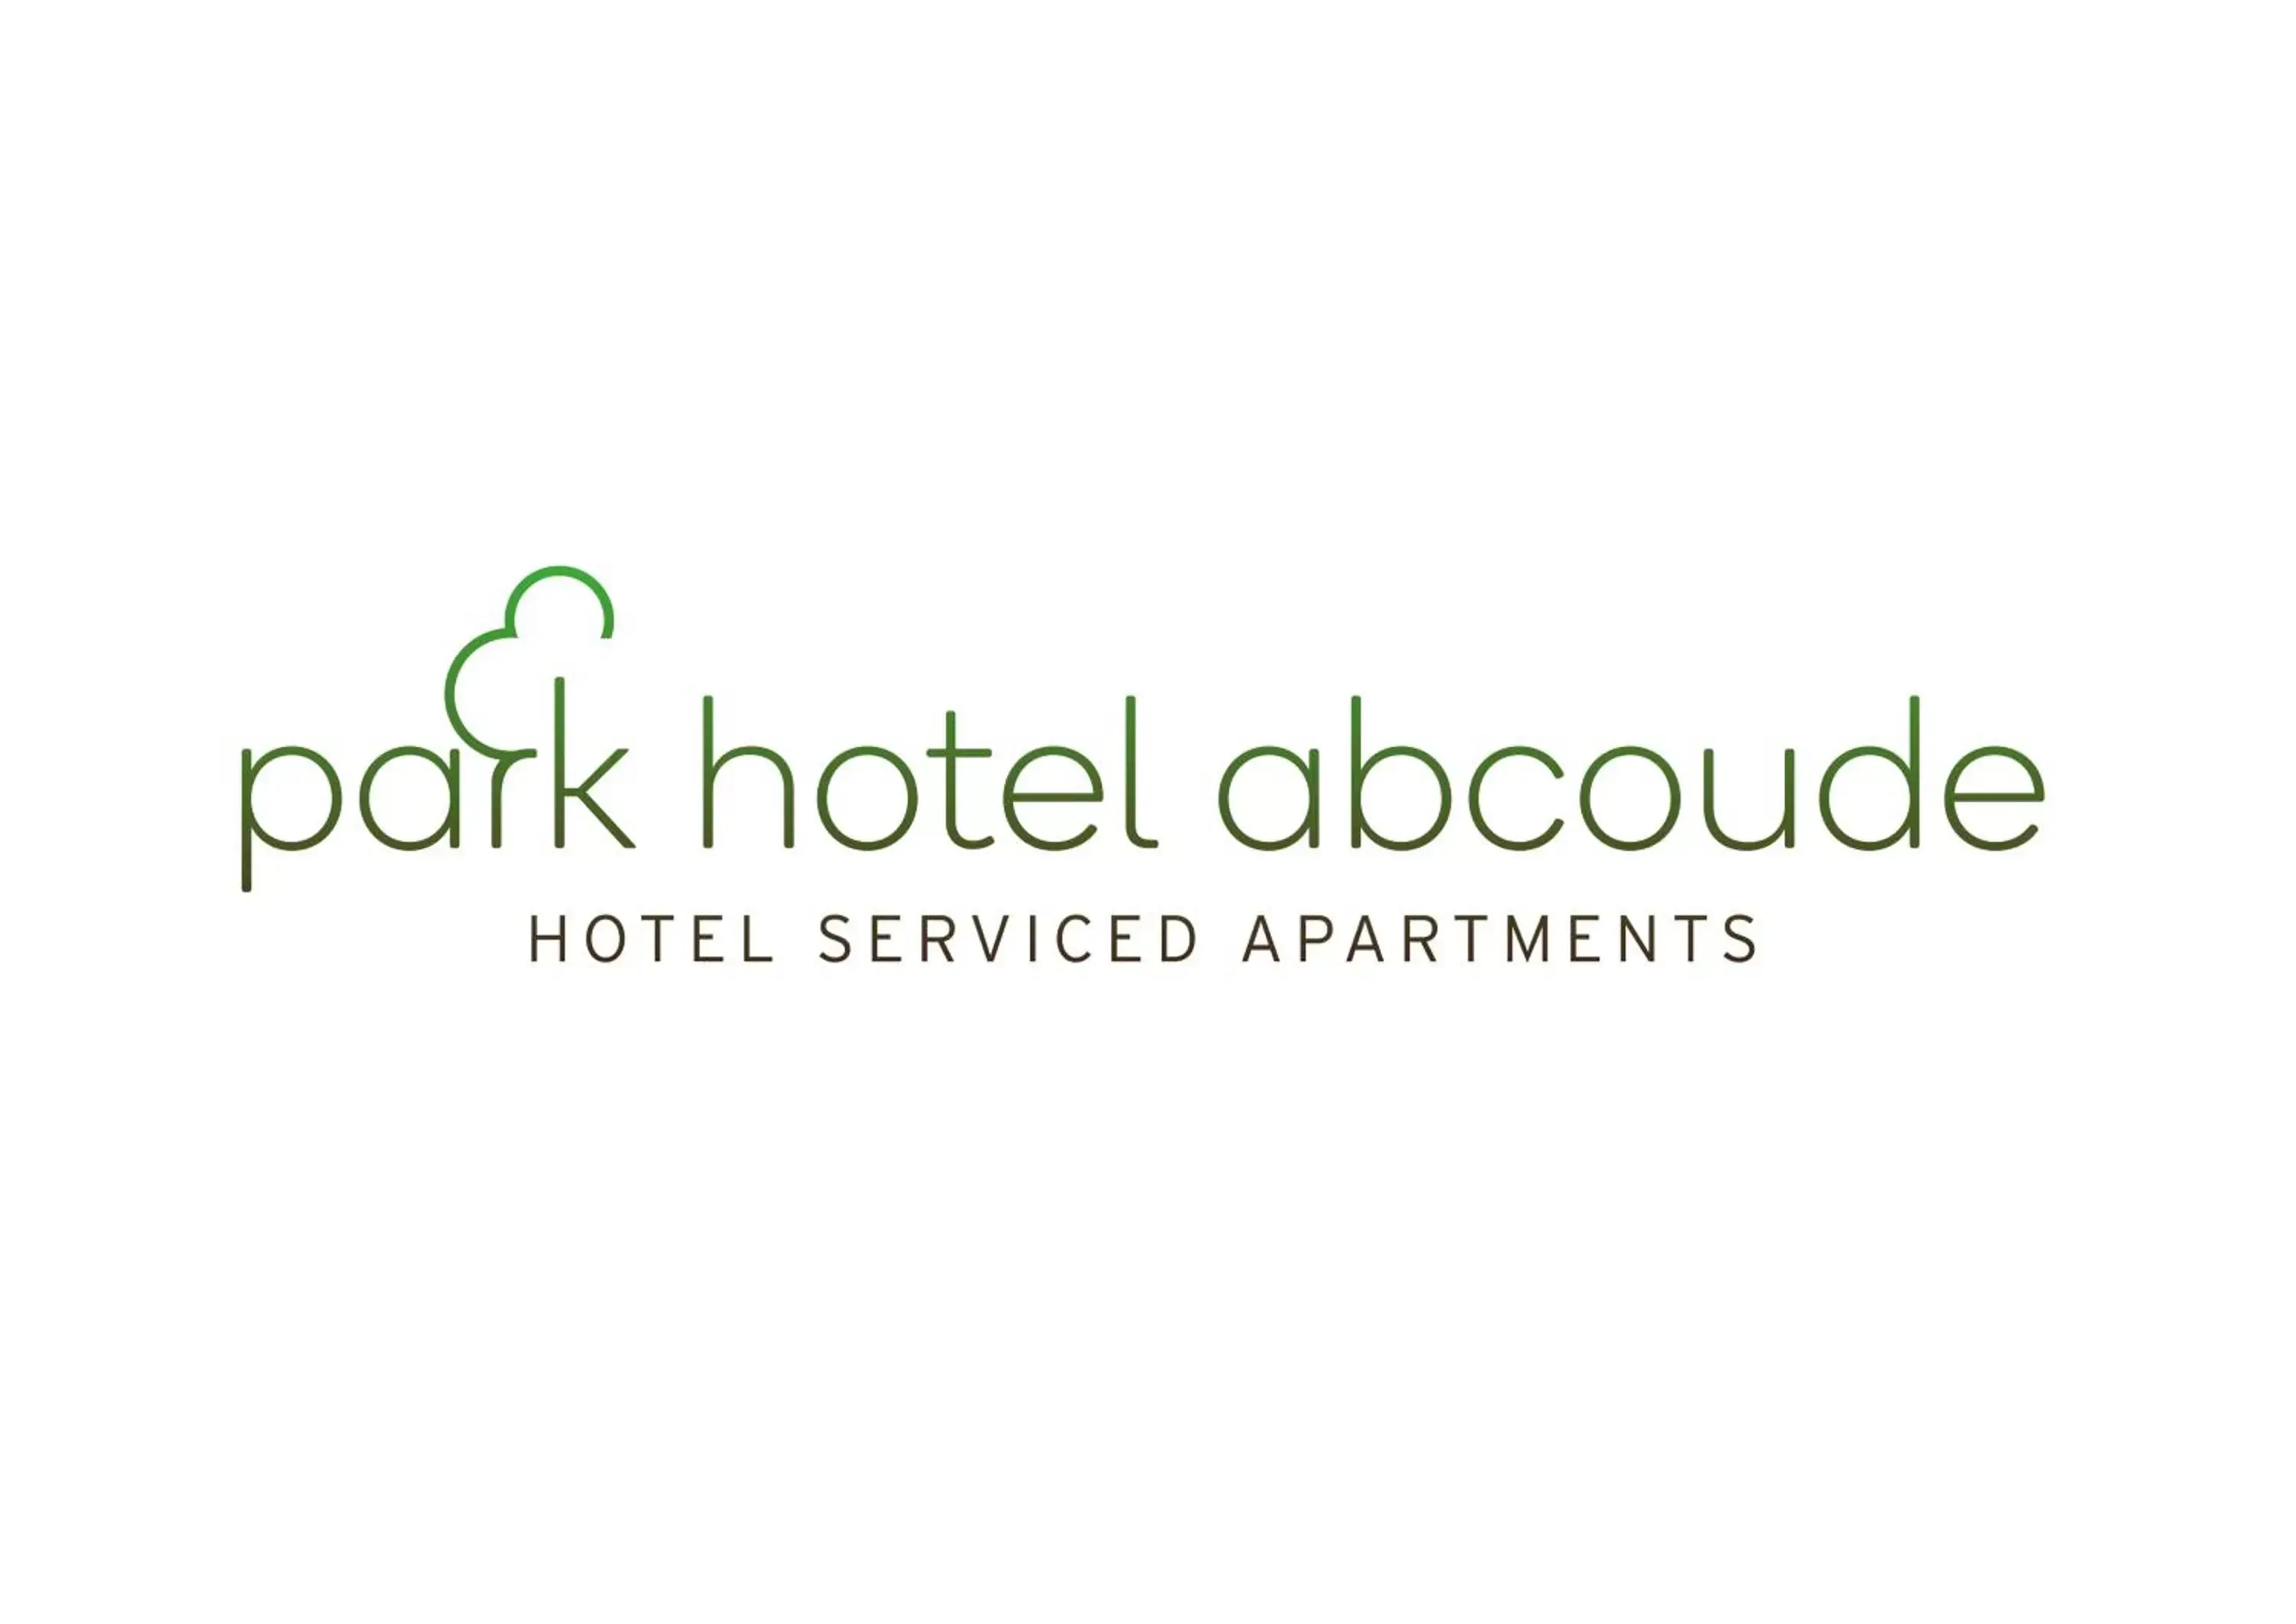 Property Logo/Sign in Parkhotel Abcoude